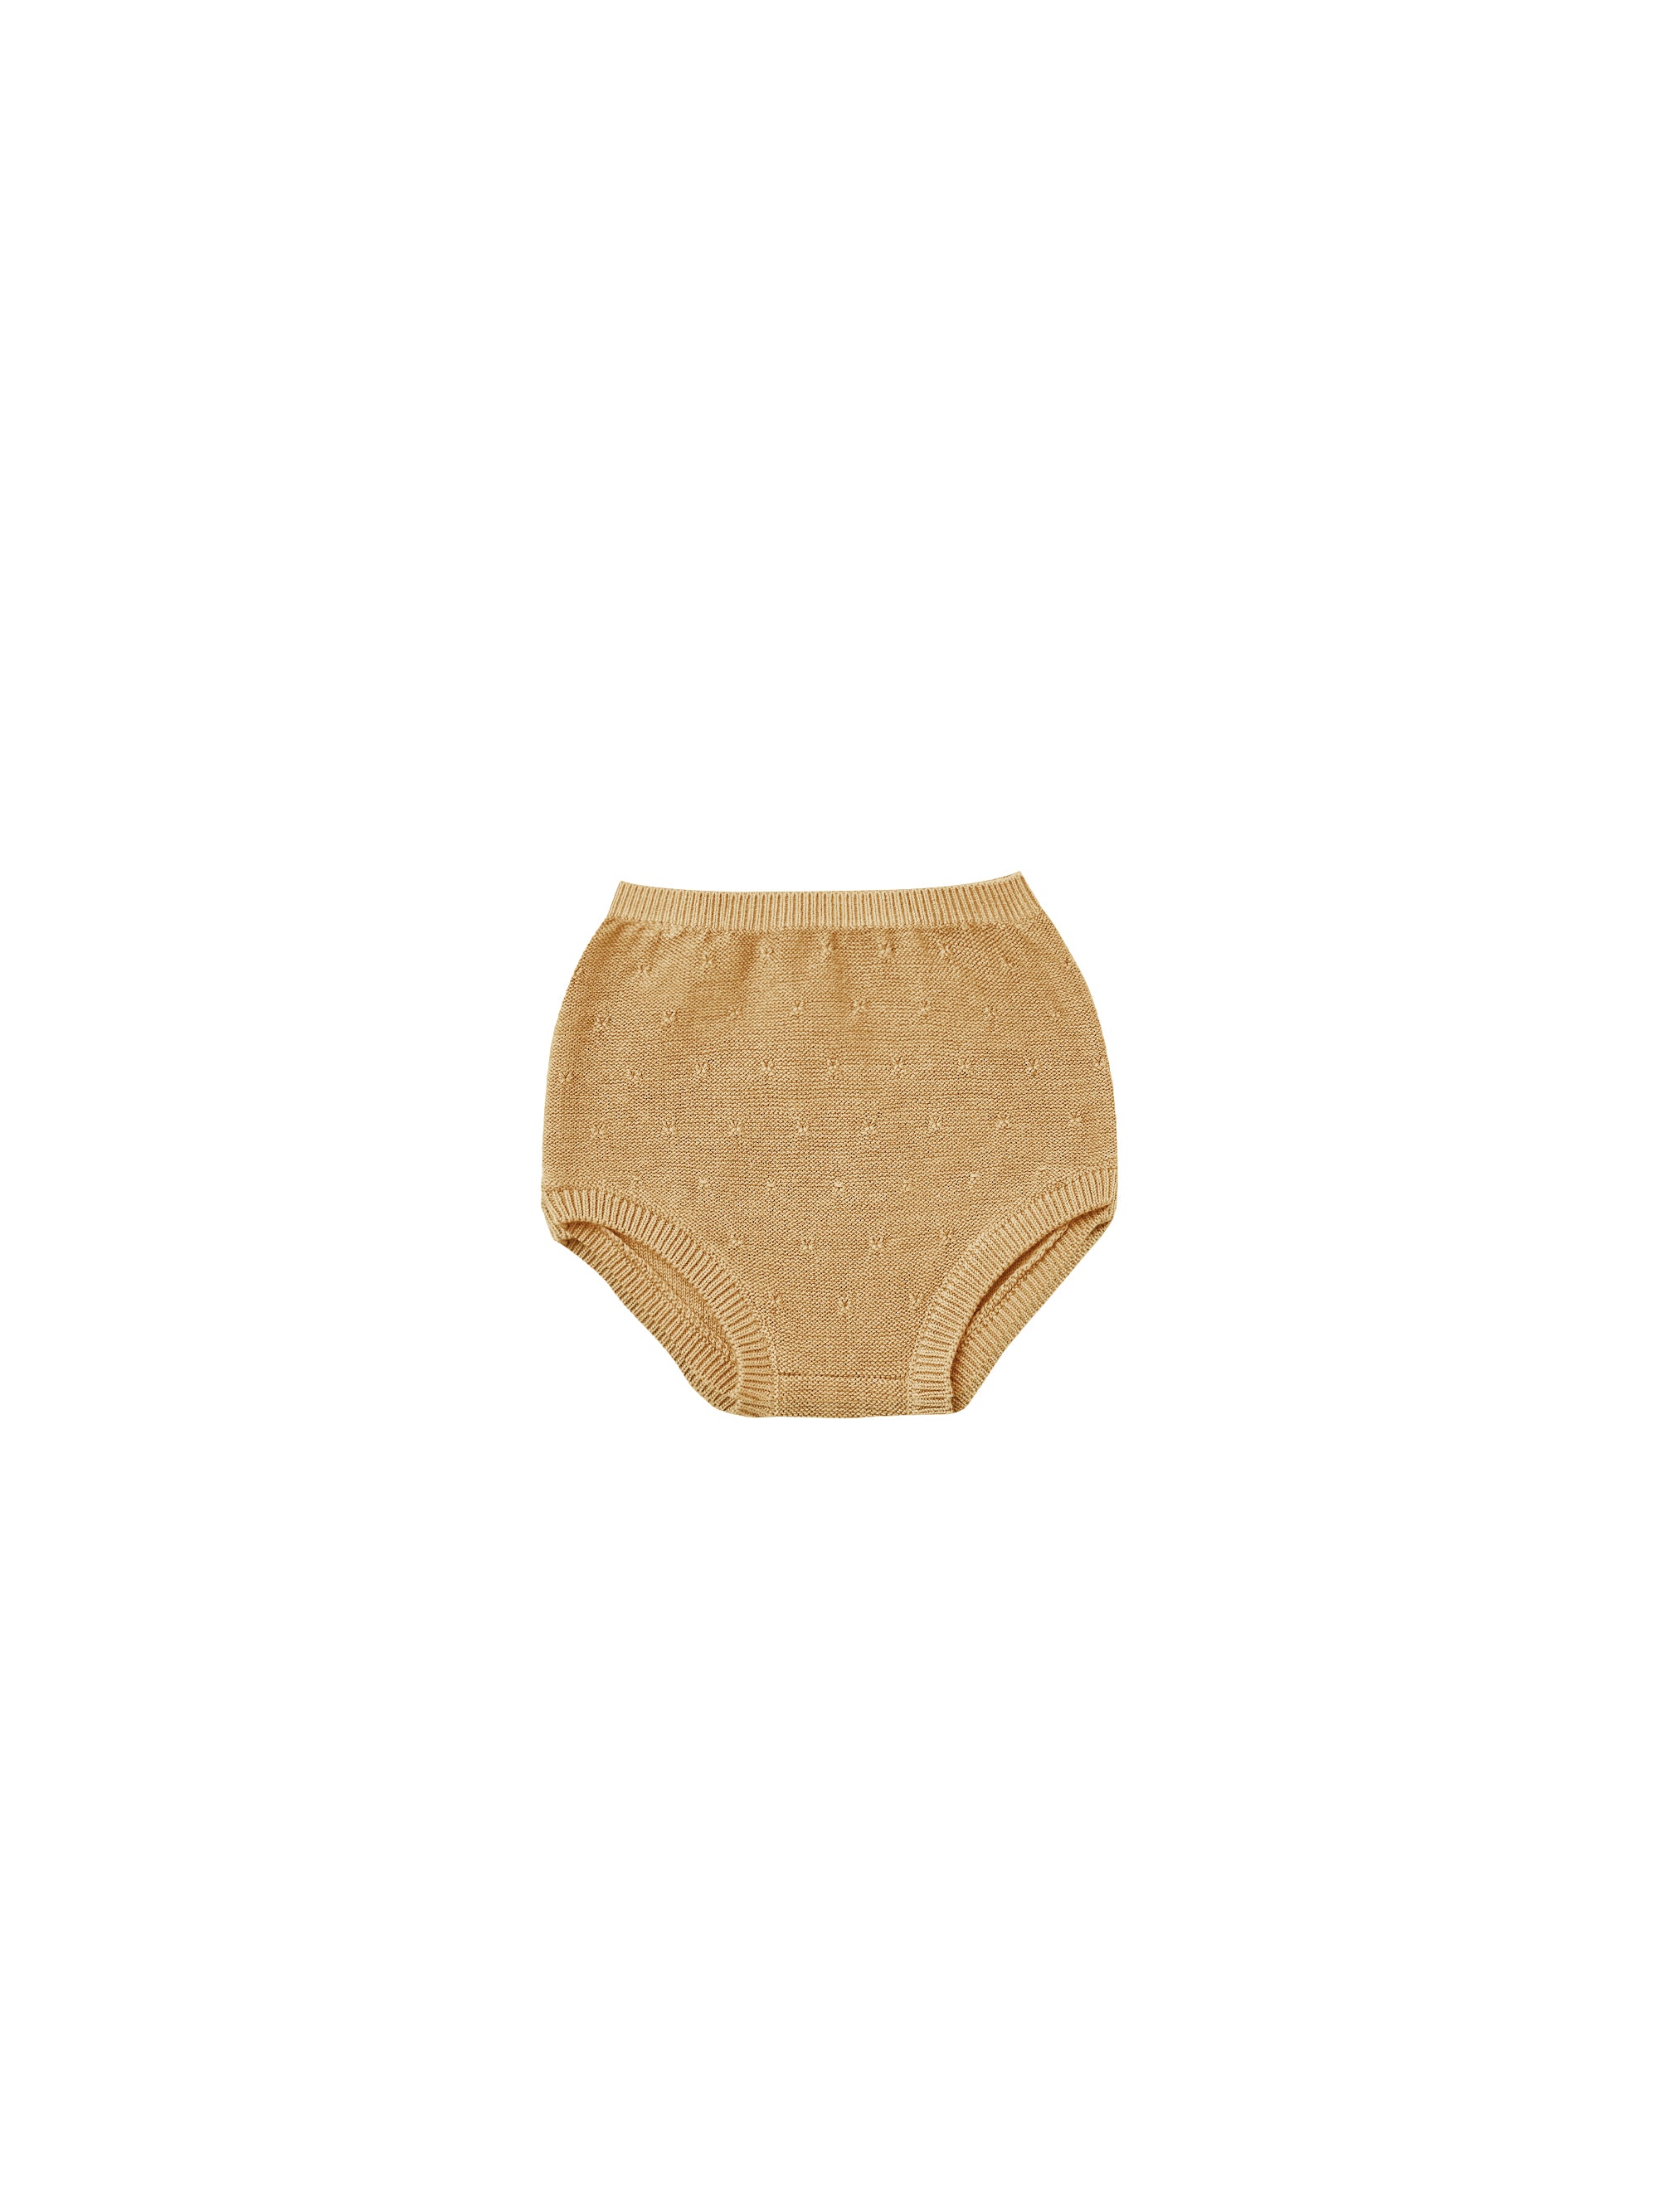 Quincy Mae Knit Bloomers - Honey